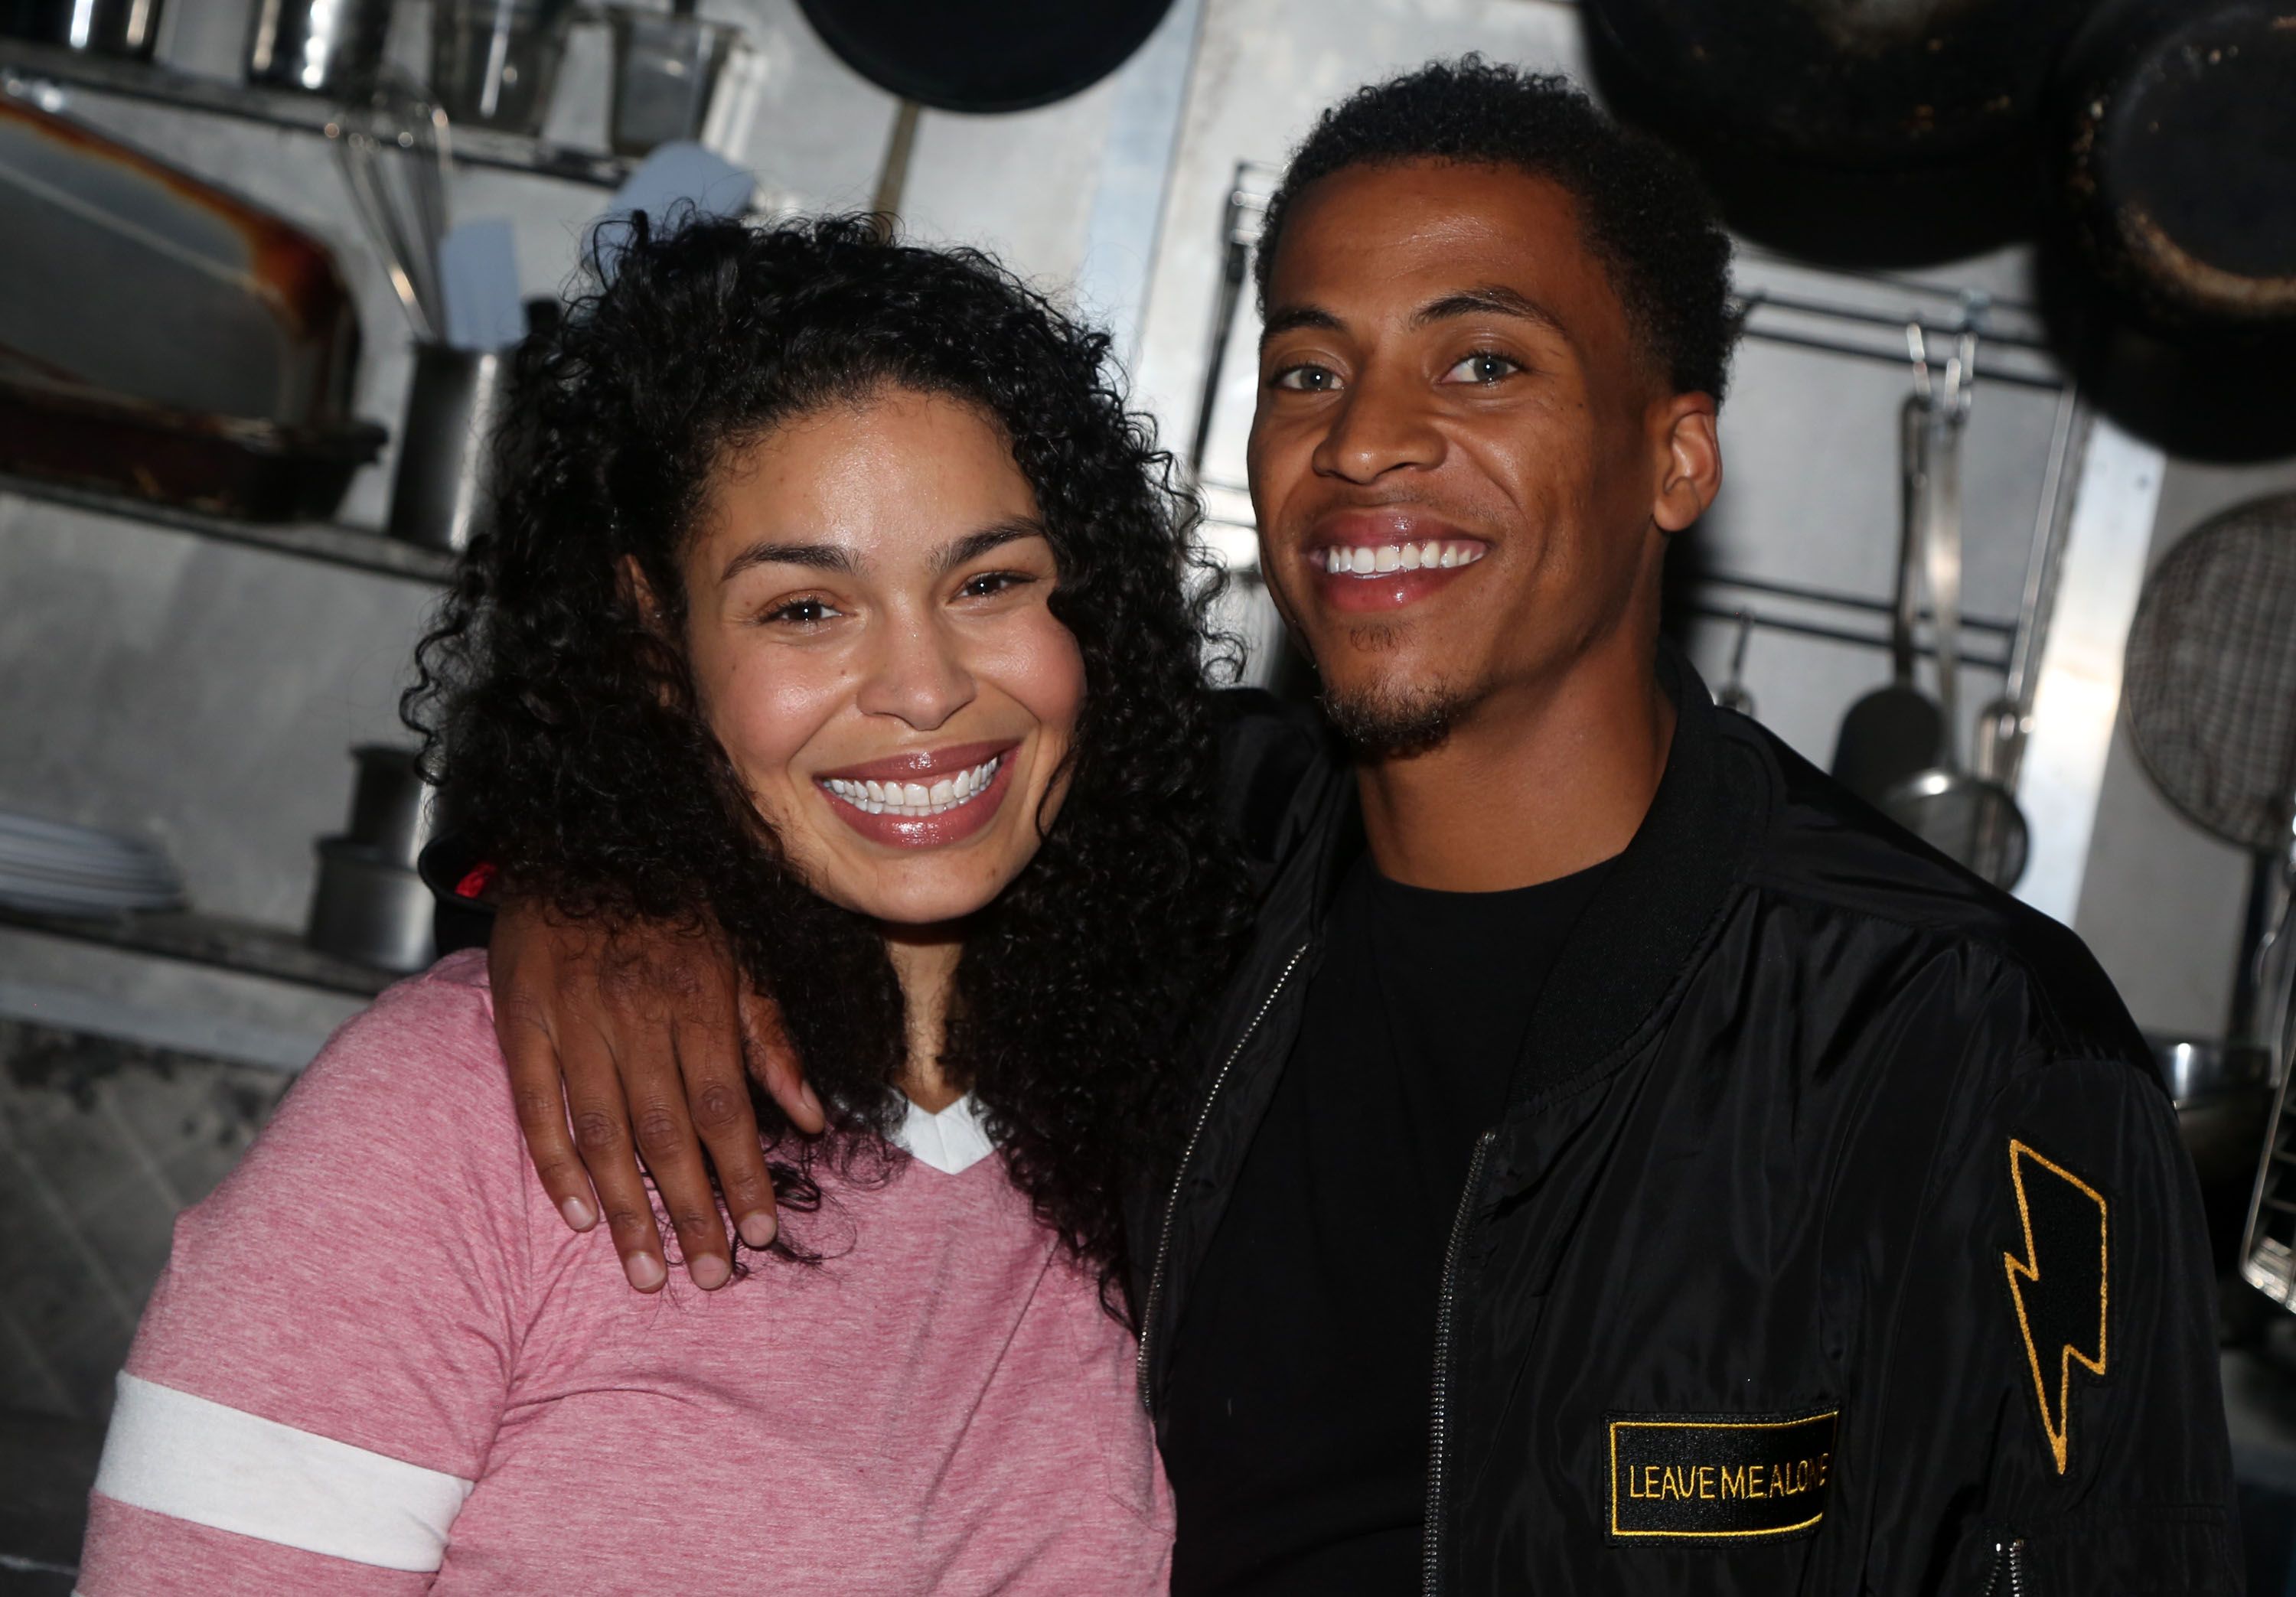 Jordin Sparks poses backstage with husband Dana Isaiah on the Broadway production of  "Waitress" in 2019 in New York City | Source: Getty Images